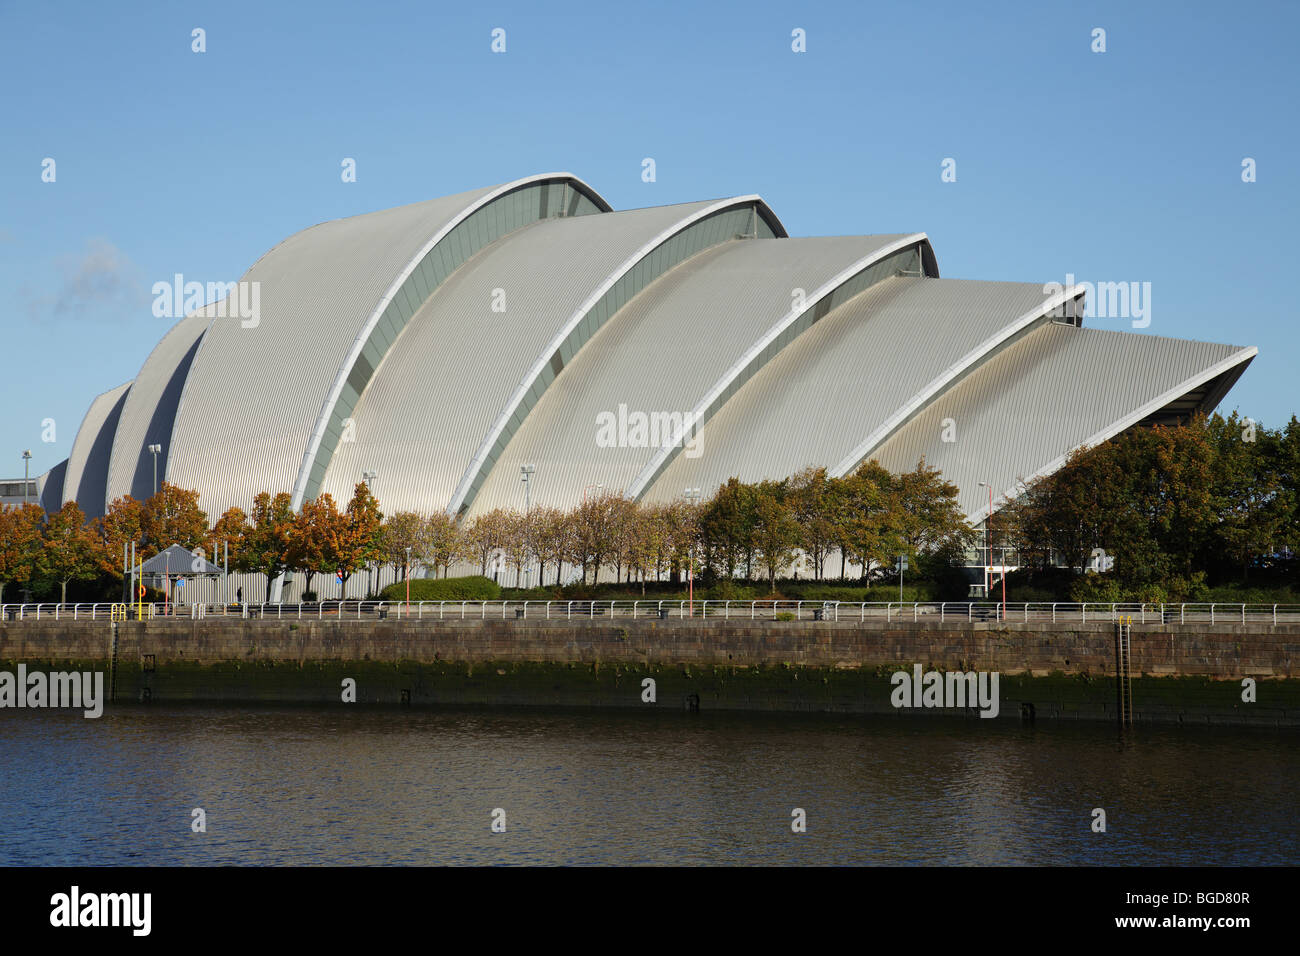 The Armadillo / Clyde Auditorium beside the River Clyde in Autumn Glasgow Scotland UK Stock Photo